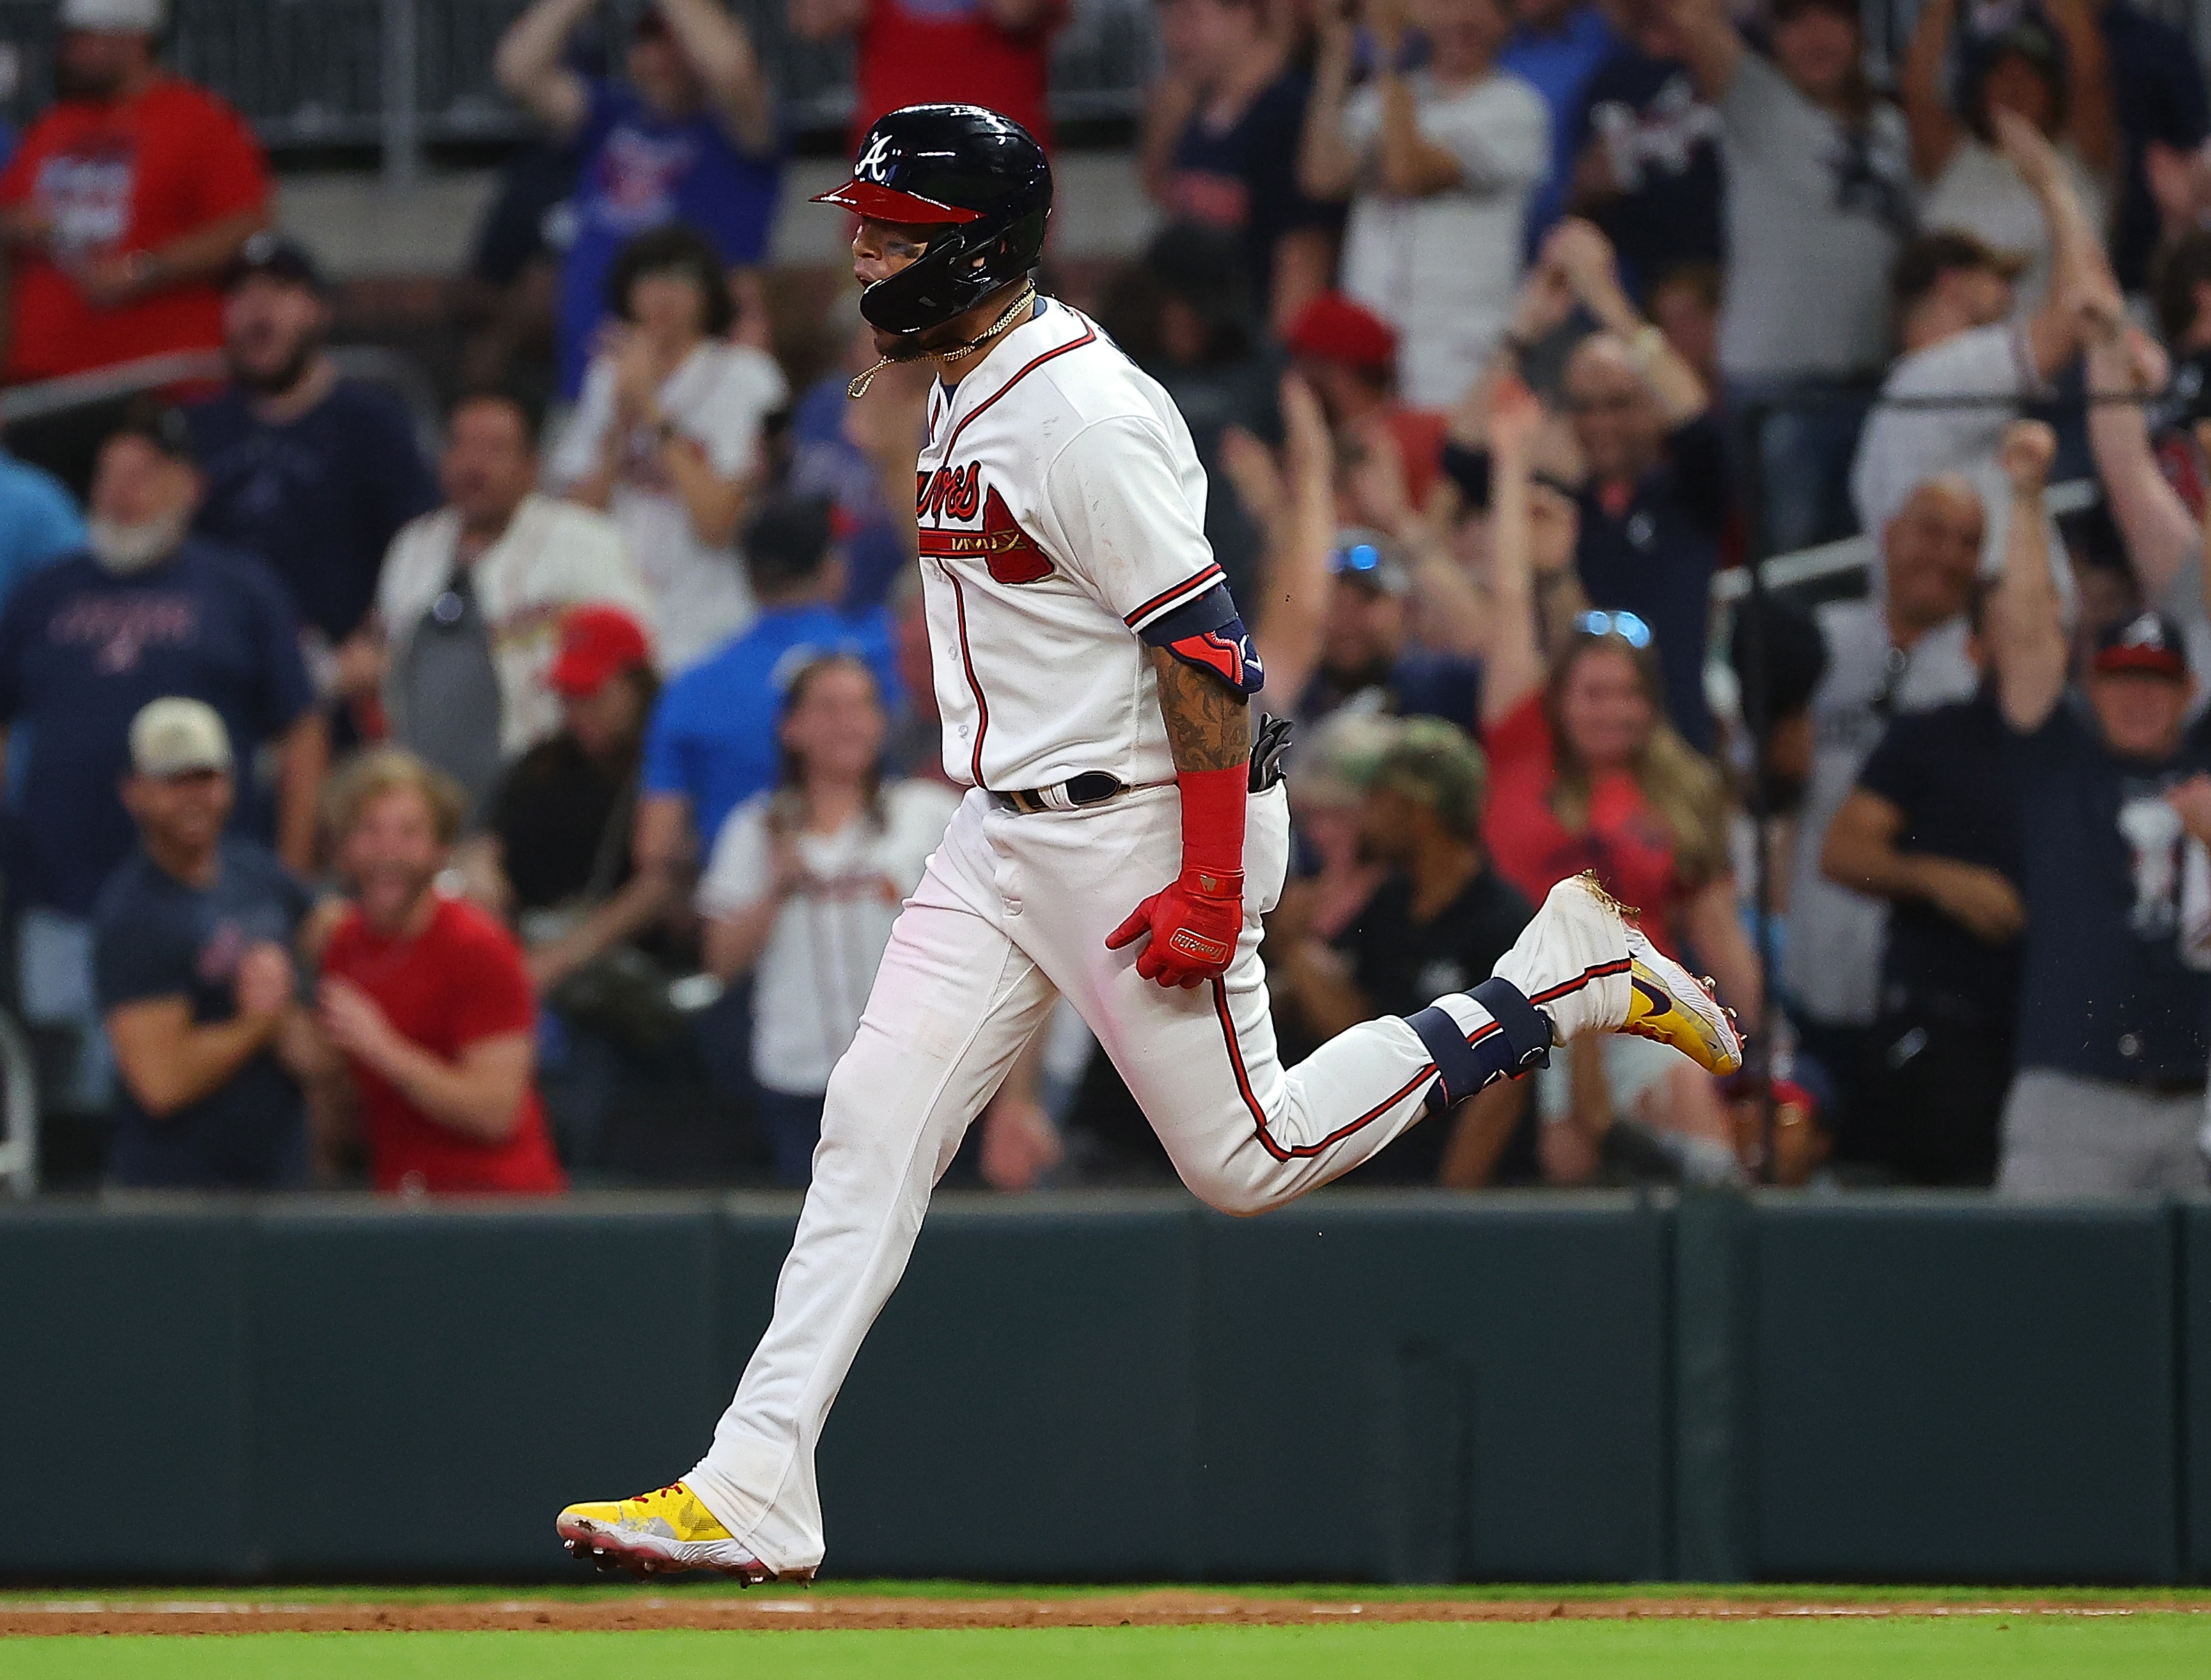 Red Sox stunning success wearing yellow City Connect jerseys continues with  walk-off grand slam